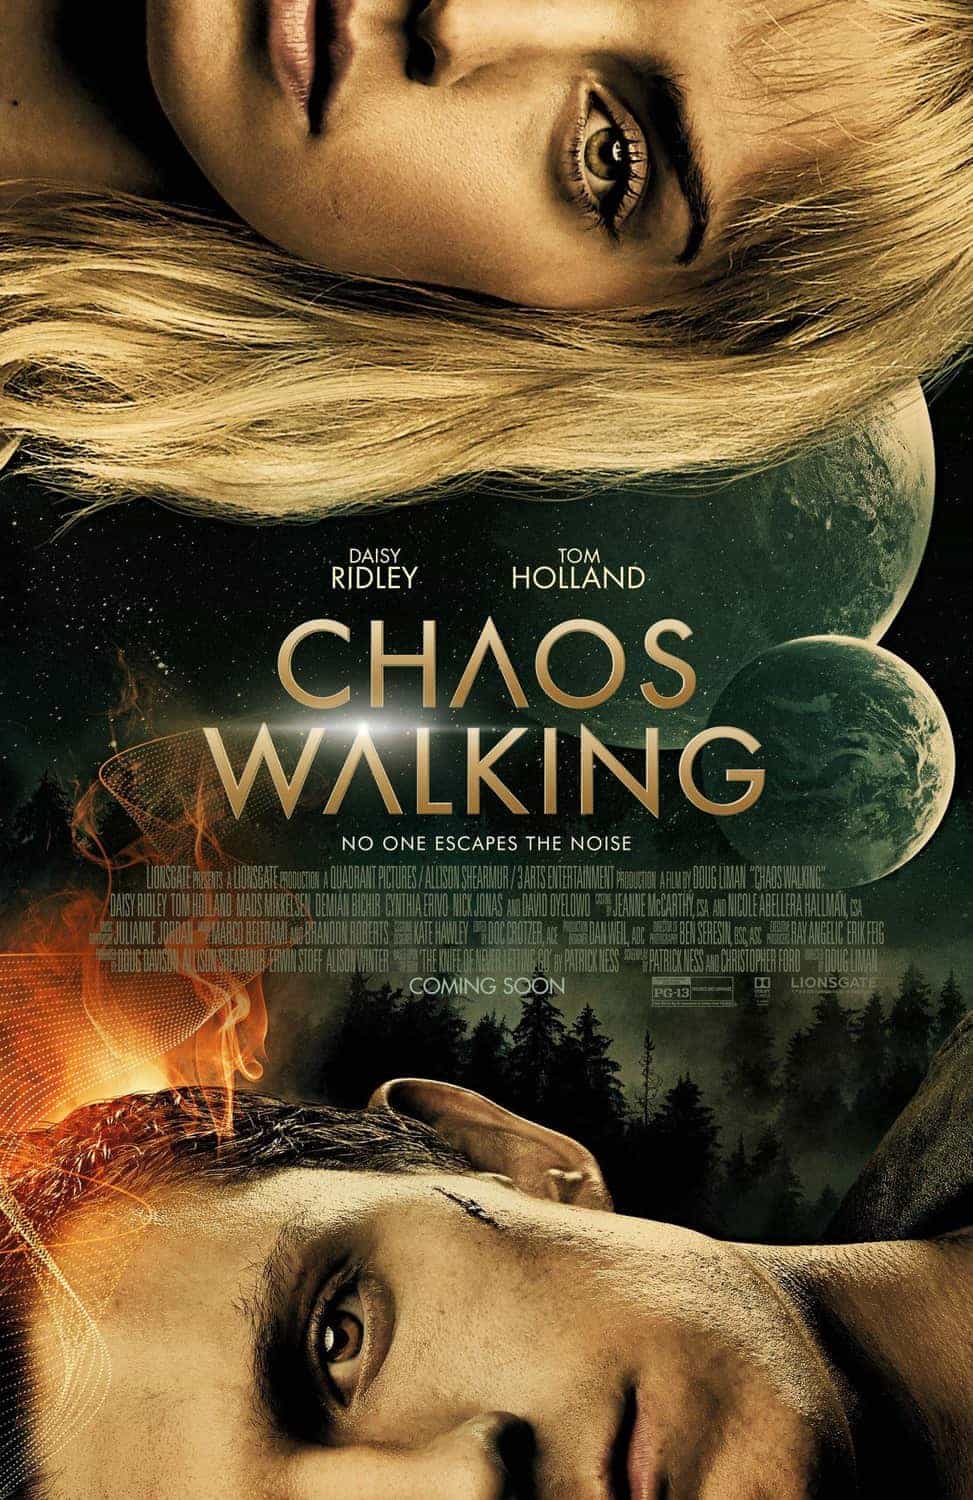 Chaos Walking is given a 12 age rating in the UK for moderate violence, threat, injury detail